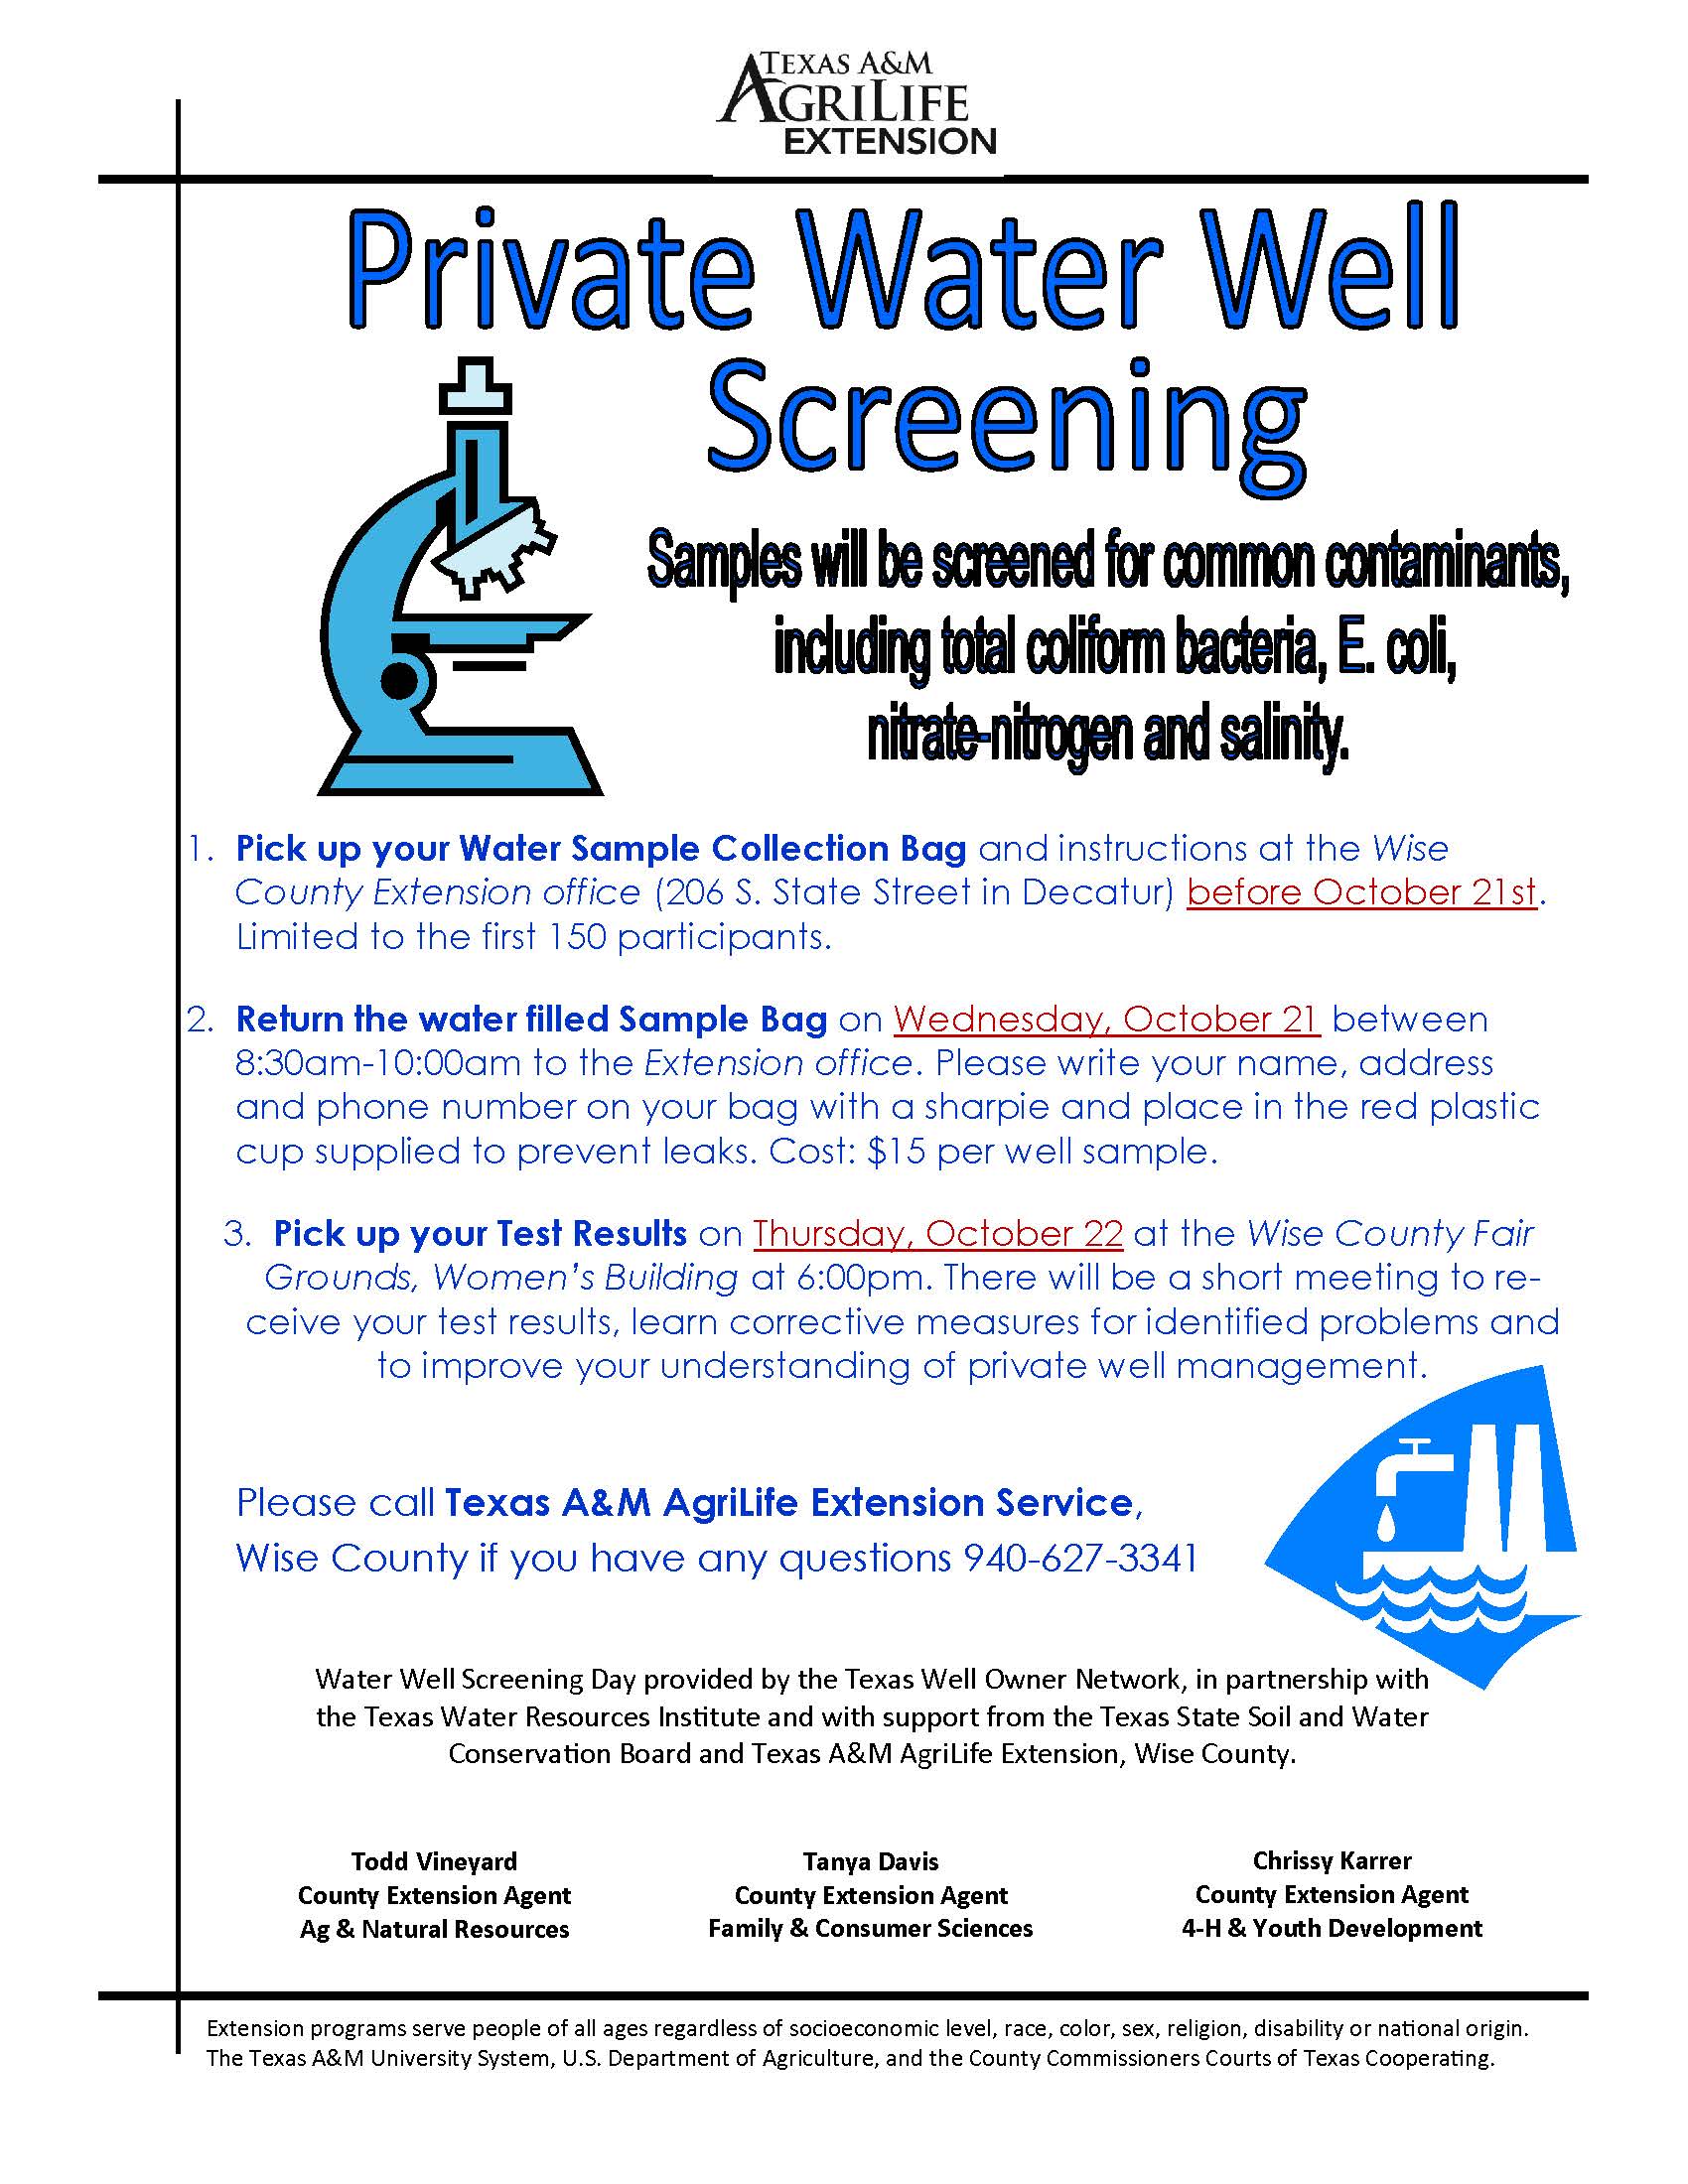 private-water-well-screening-program-pick-up-your-water-results